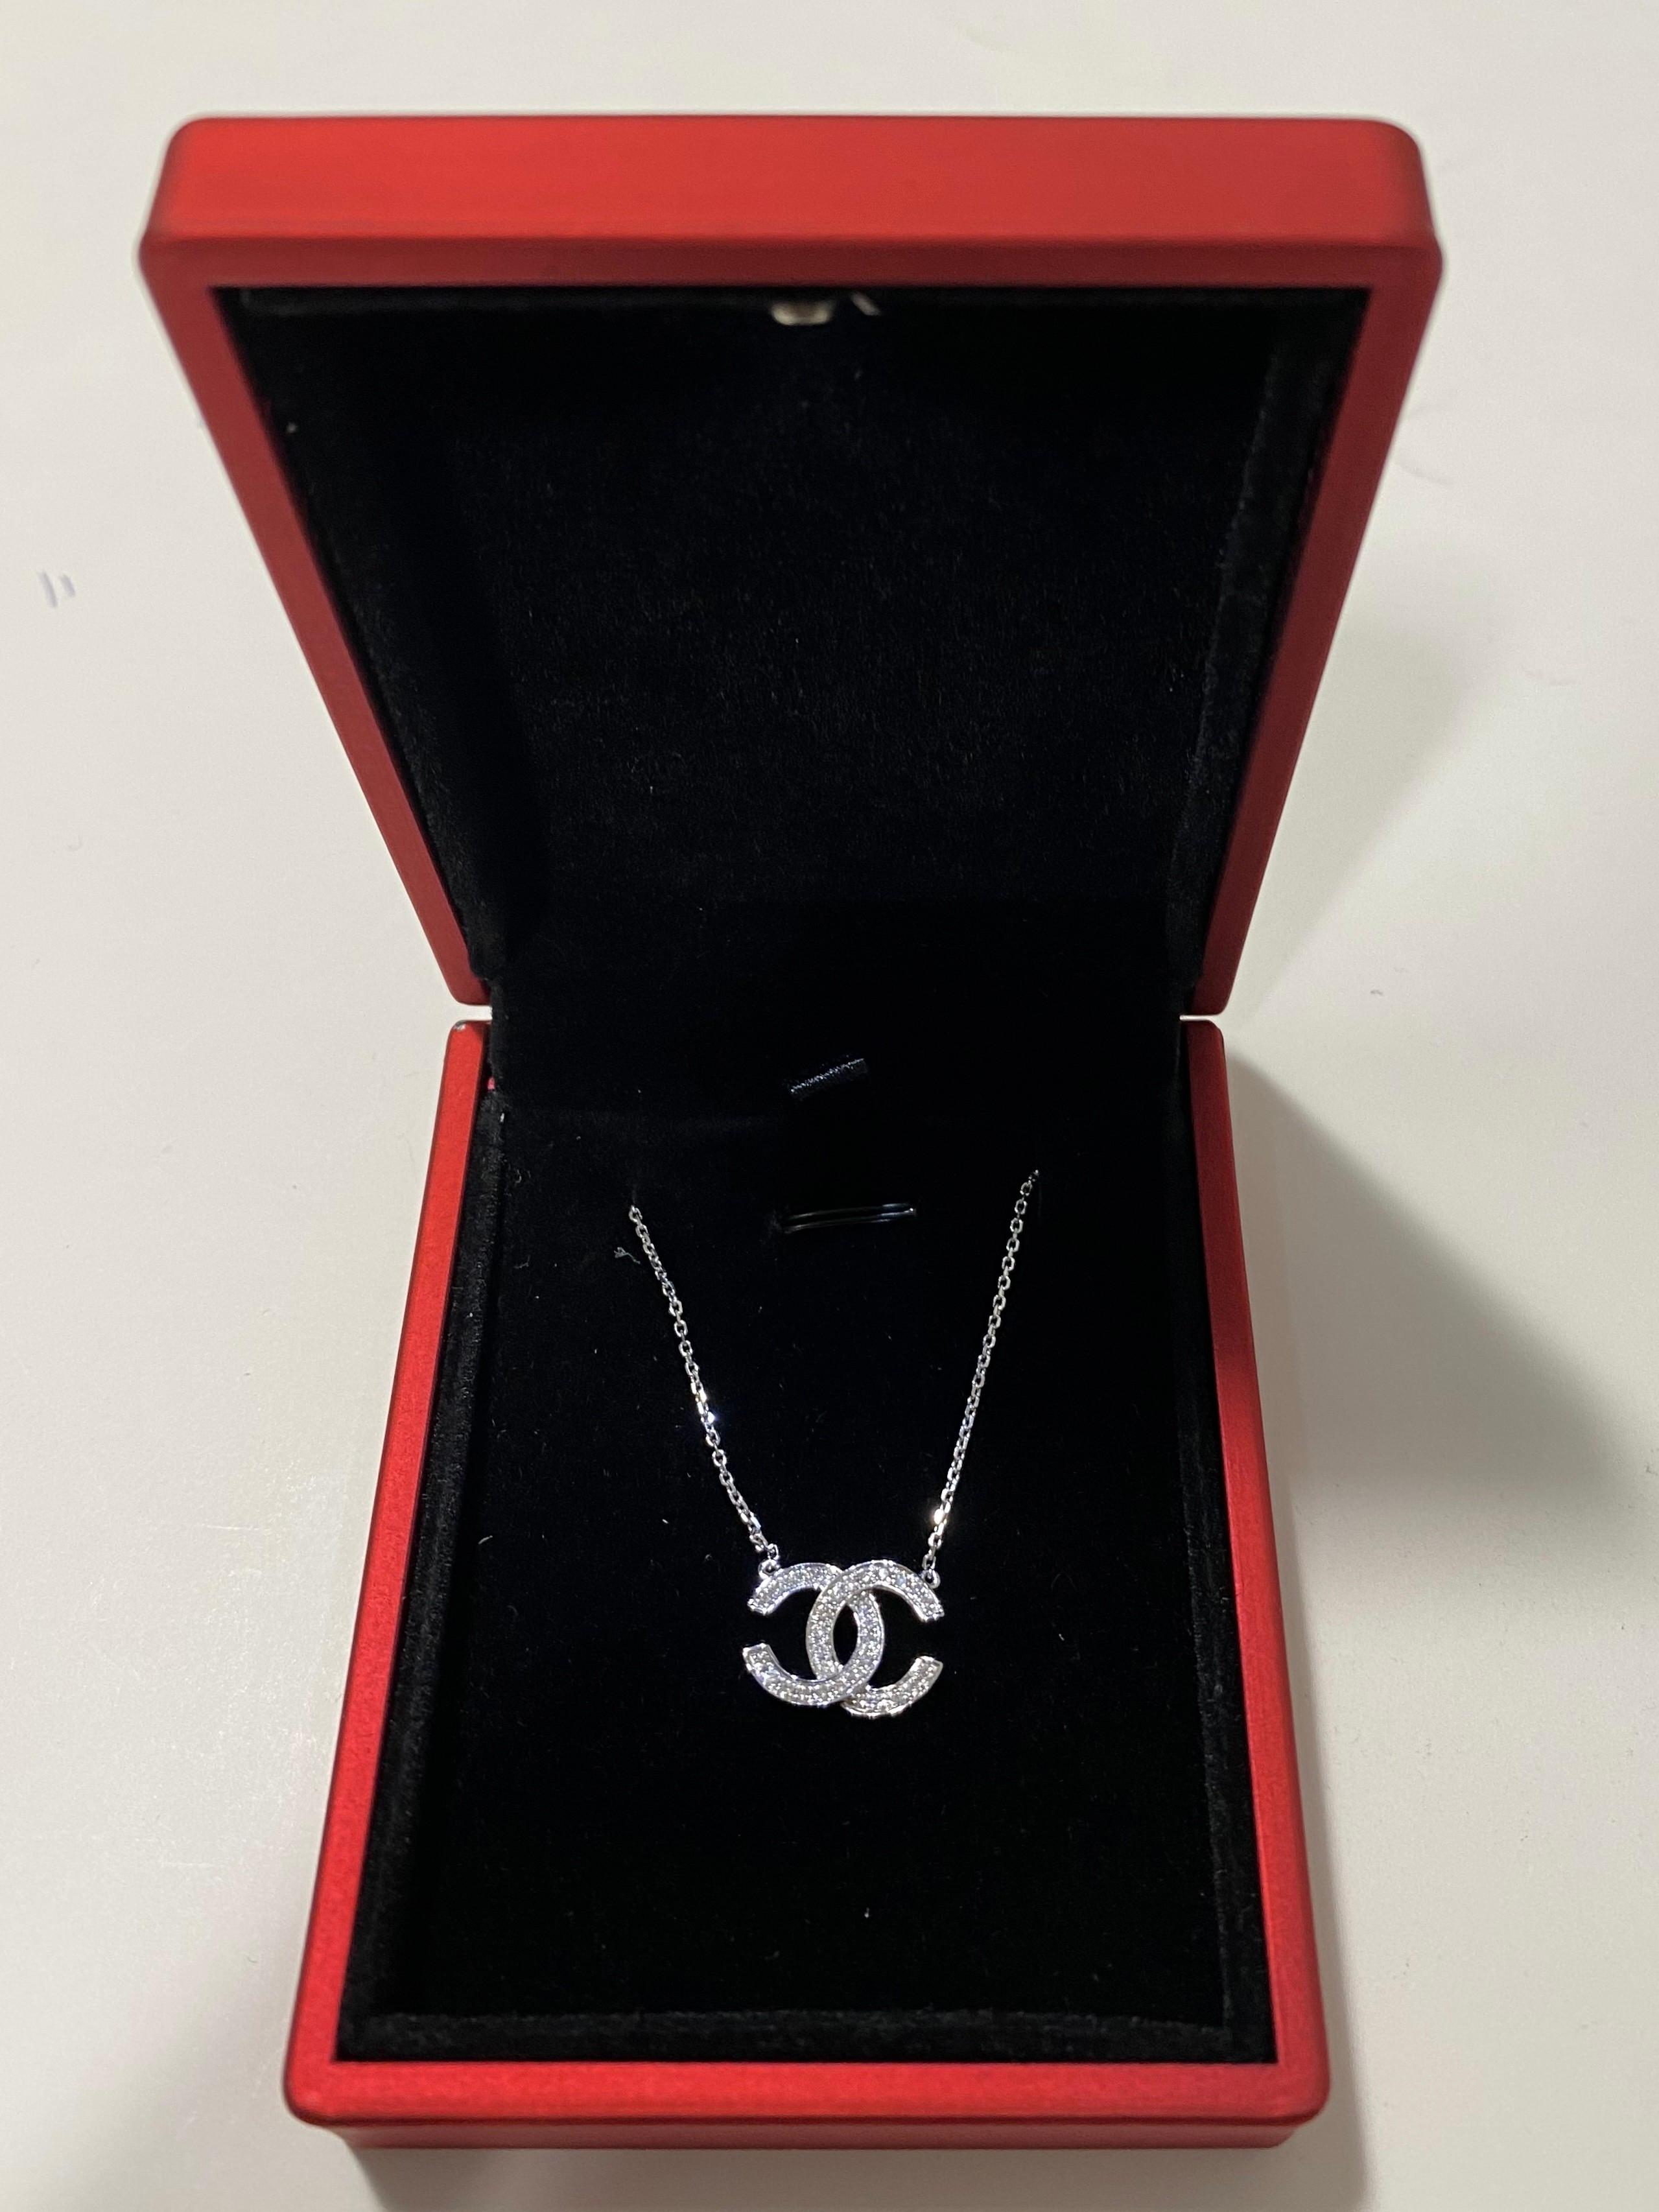 Hong Kong Customs today (June 17) conducted an operation against the sale of counterfeit goods at a fair being held at the Hong Kong Convention and Exhibition Centre and seized about 49 items of suspected counterfeit jewellery with a total estimated market value of about $1.74 million. Photo shows the suspected counterfeit necklace seized.